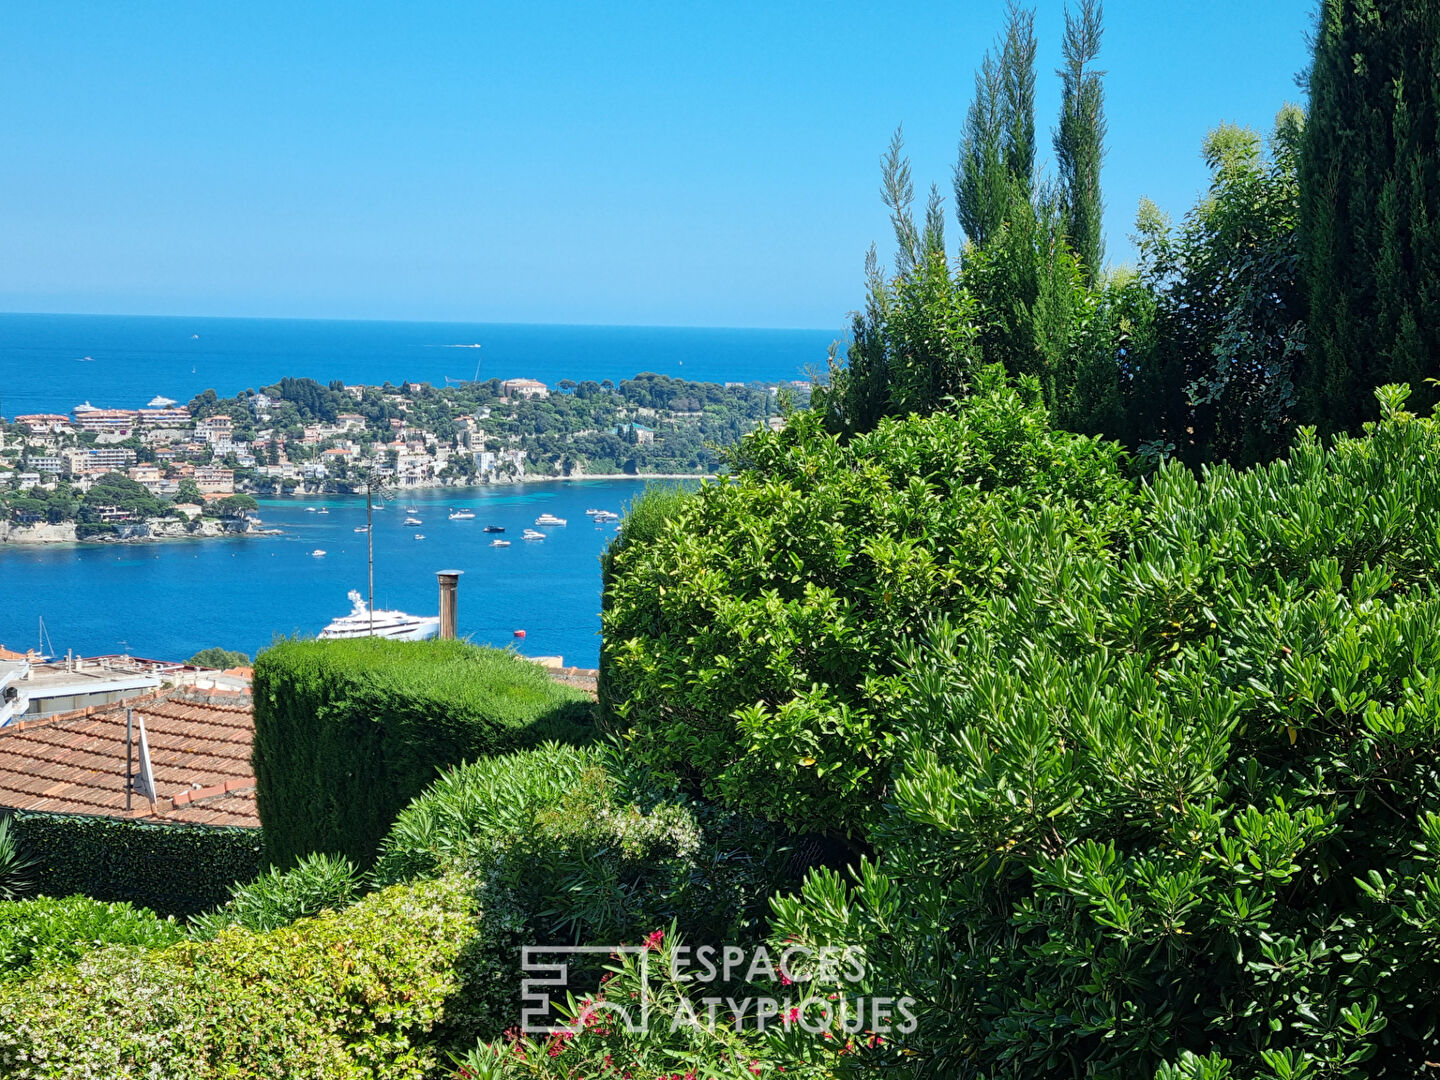 Apartment panoramic view over the bay of Villefranche